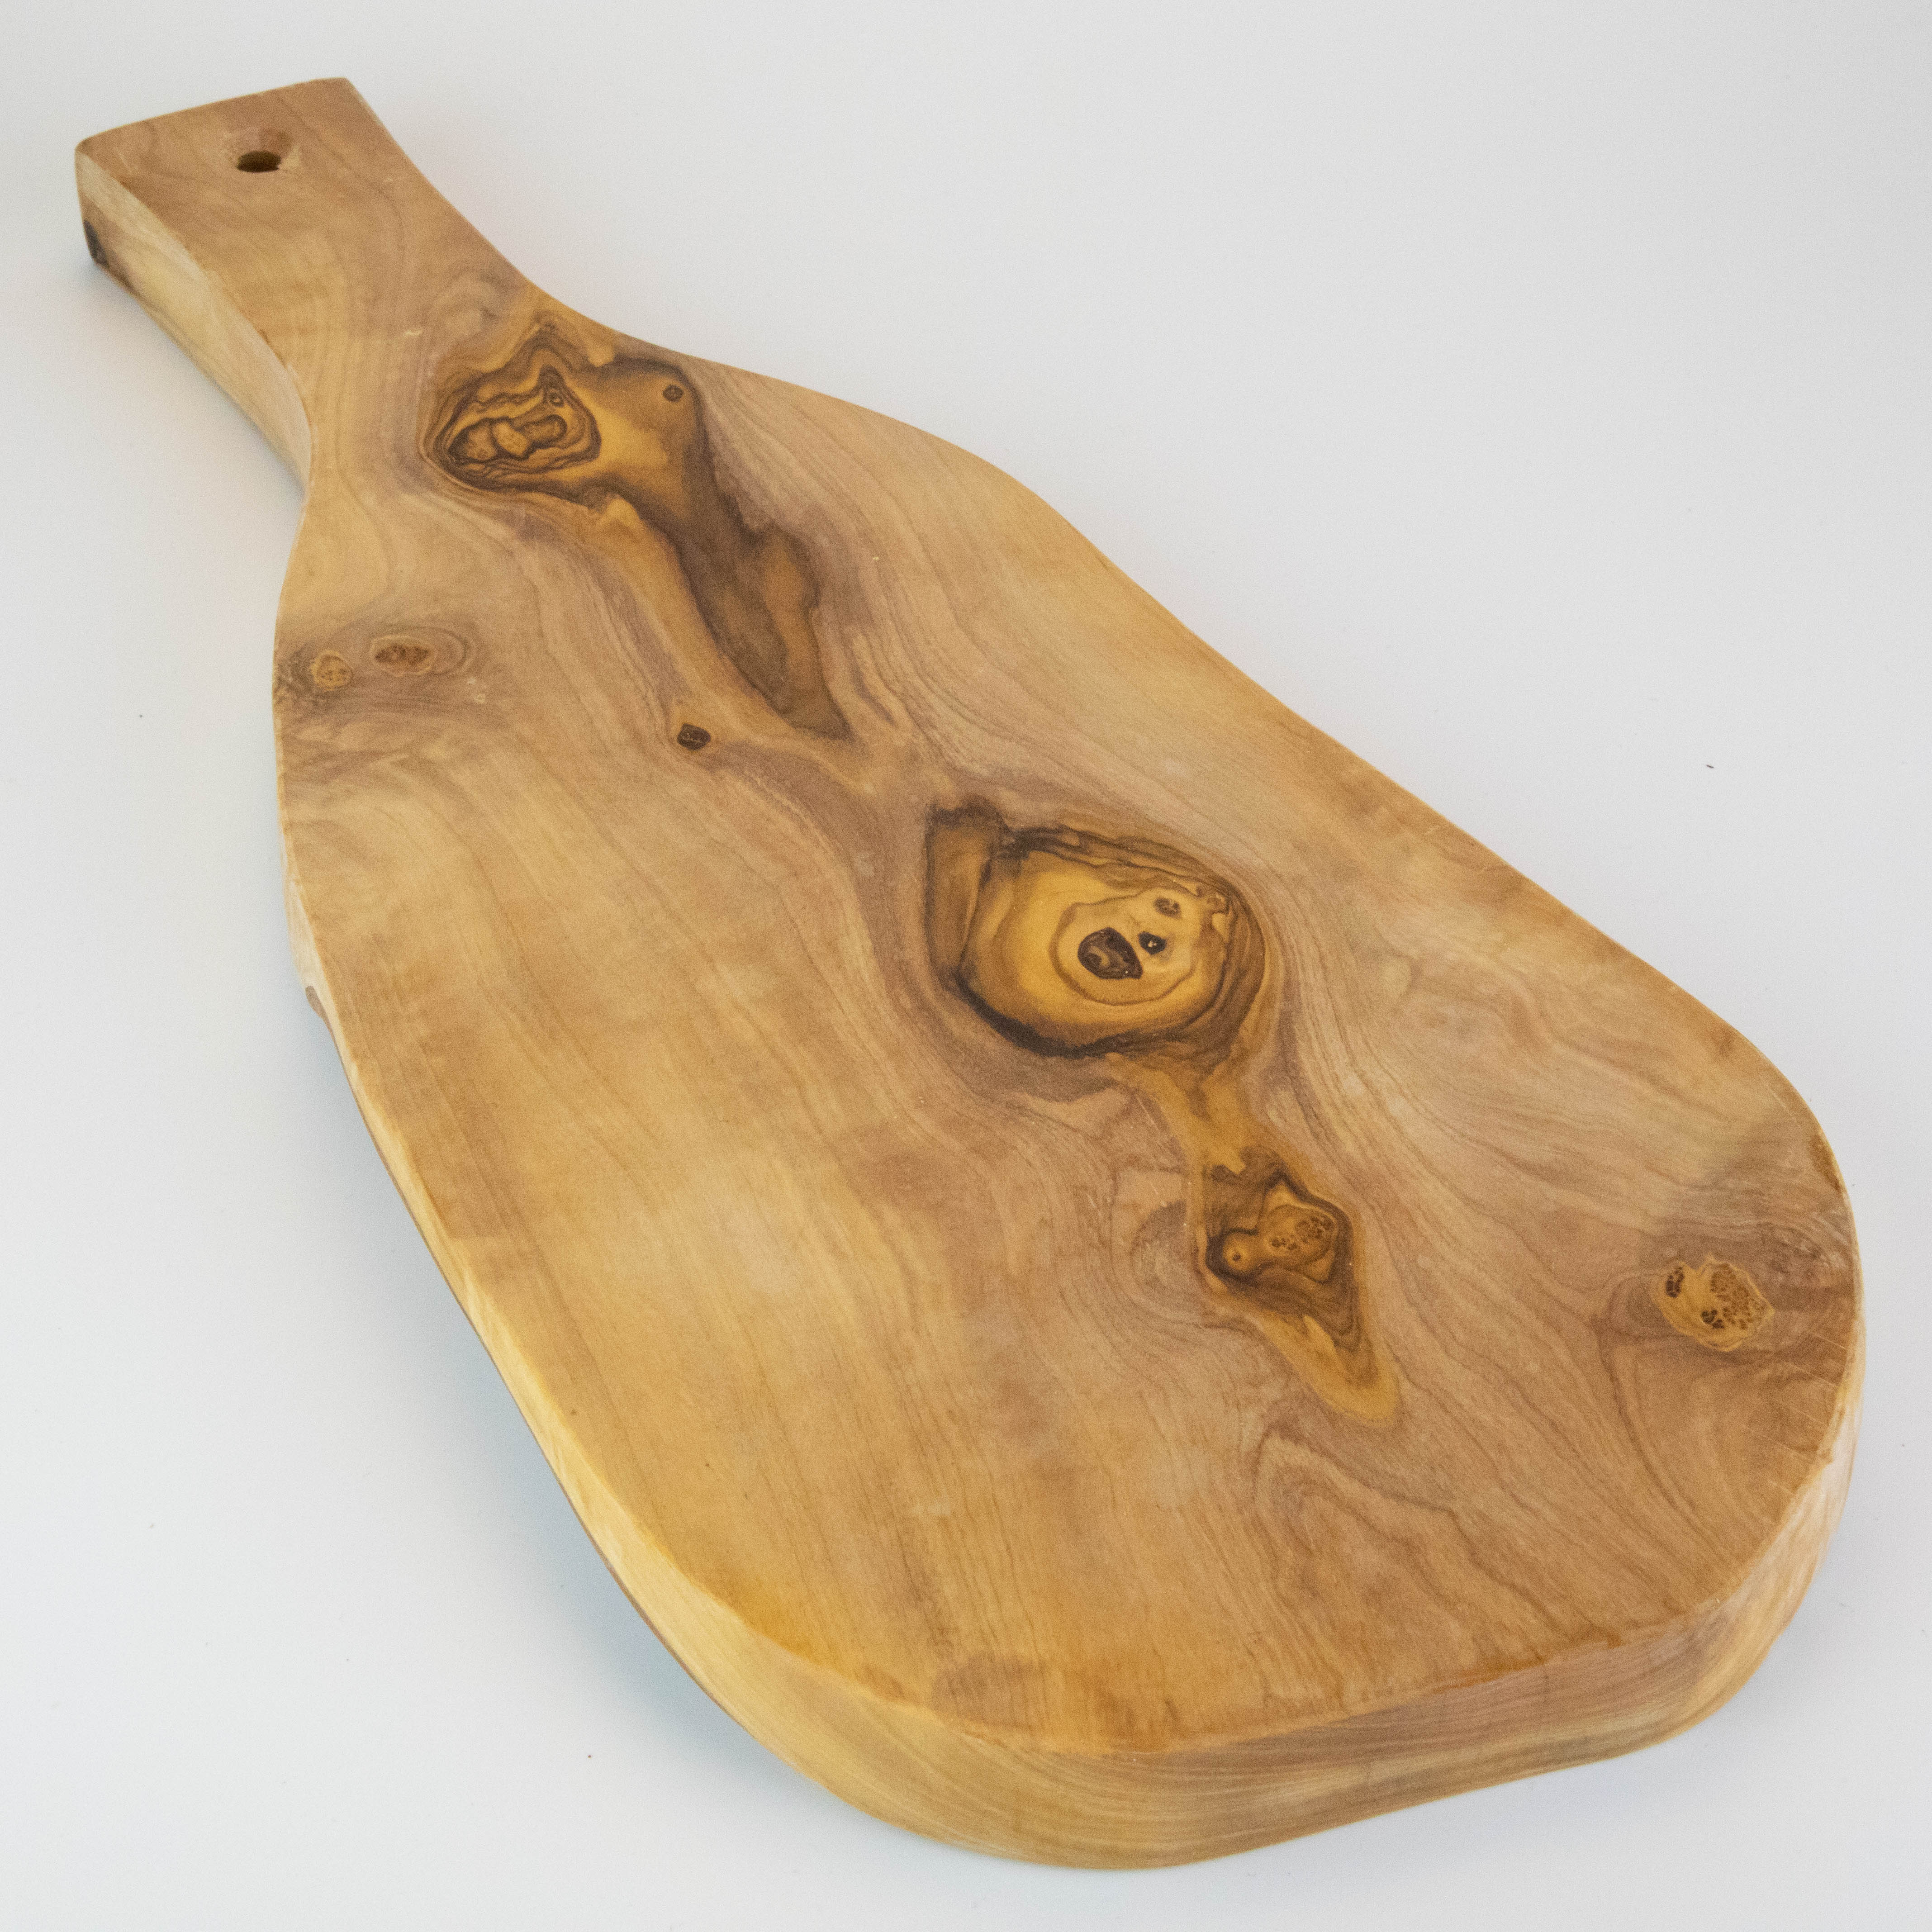 Rustic serving board with olive wood handle, 50-55 cm.